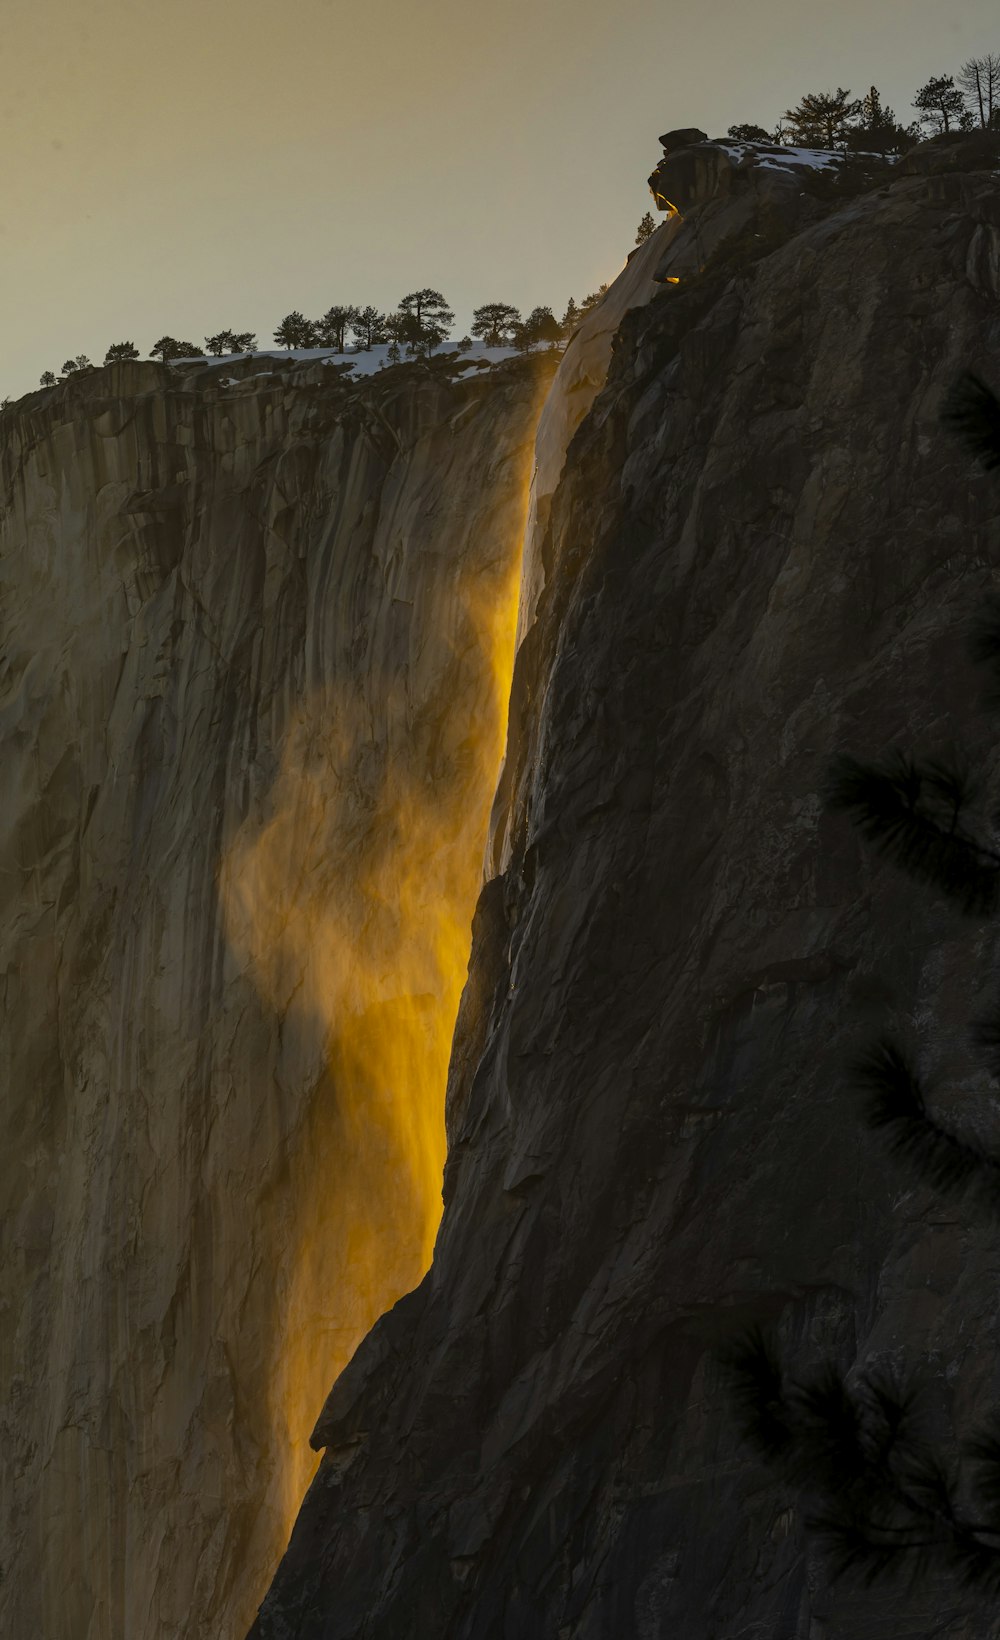 a very tall cliff with a waterfall coming out of it